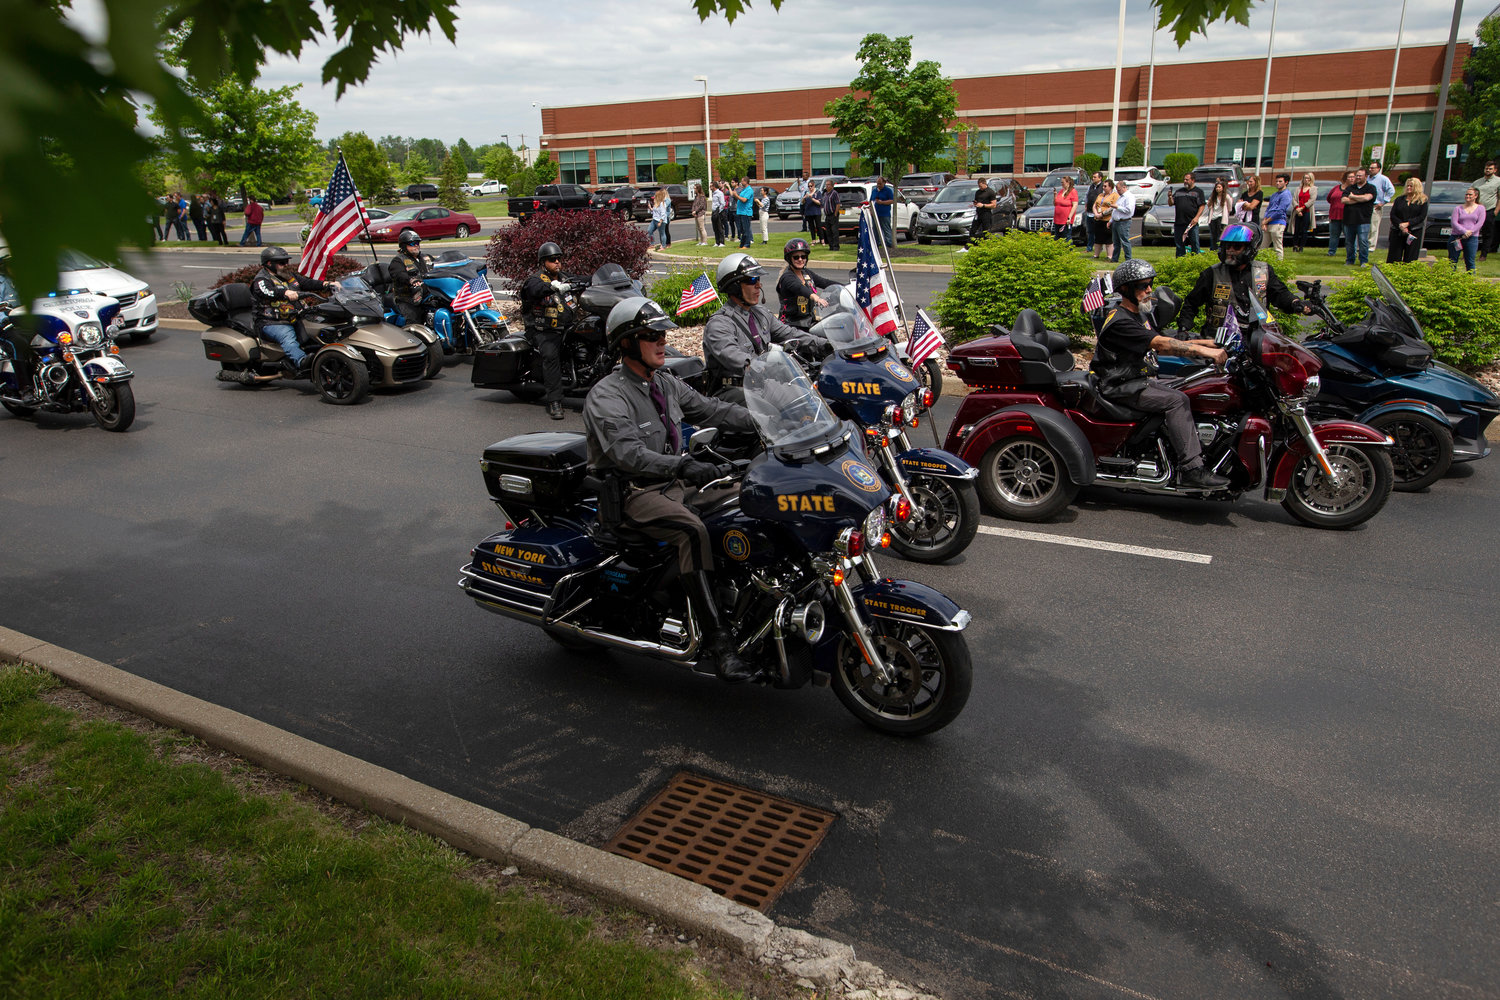 New York State Troopers lead a procession after the funeral service for Aaron Salter Jr. at The Chapel at Crosspoint on Wednesday, May 25, 2022, in Getzville, N.Y. Salter Jr. was killed in the Buffalo supermarket shooting on May 14. (AP Photo/Joshua Bessex)